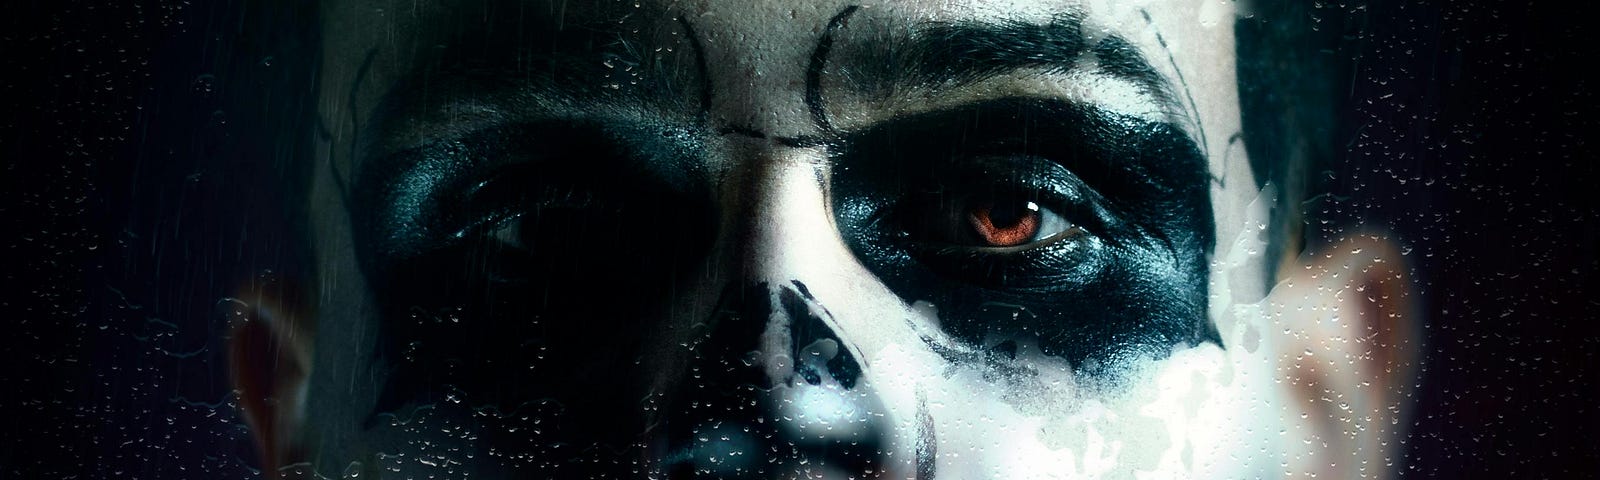 A close-up shot of a man with ghostly black and white face paint, he’s staring through a water-soaked window. The image is focused on his left brown eye.